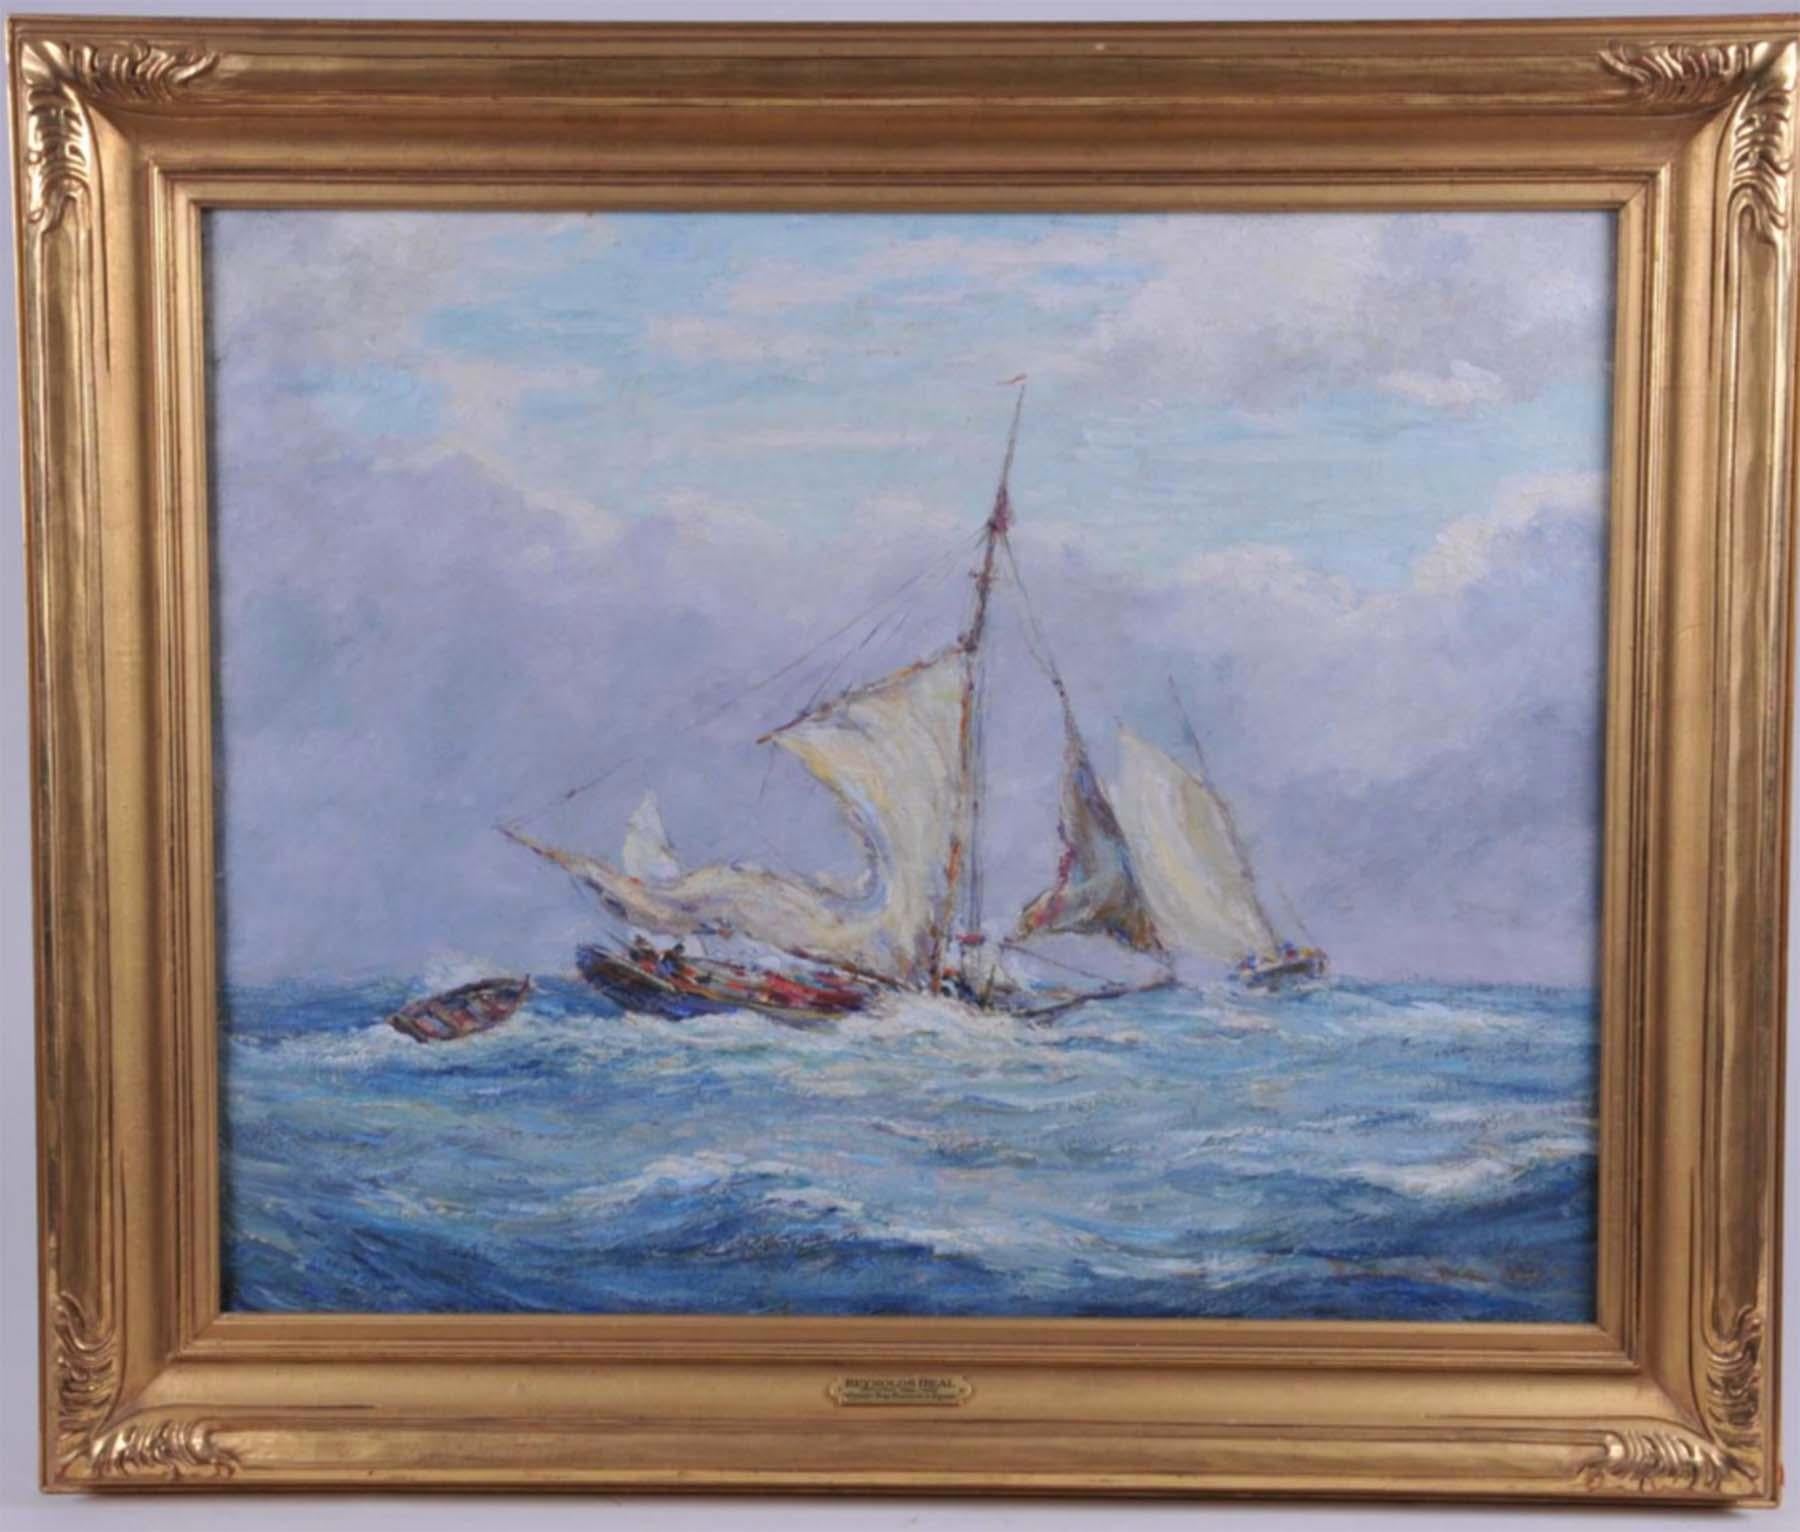 Oyster Bay Boats in a Squall